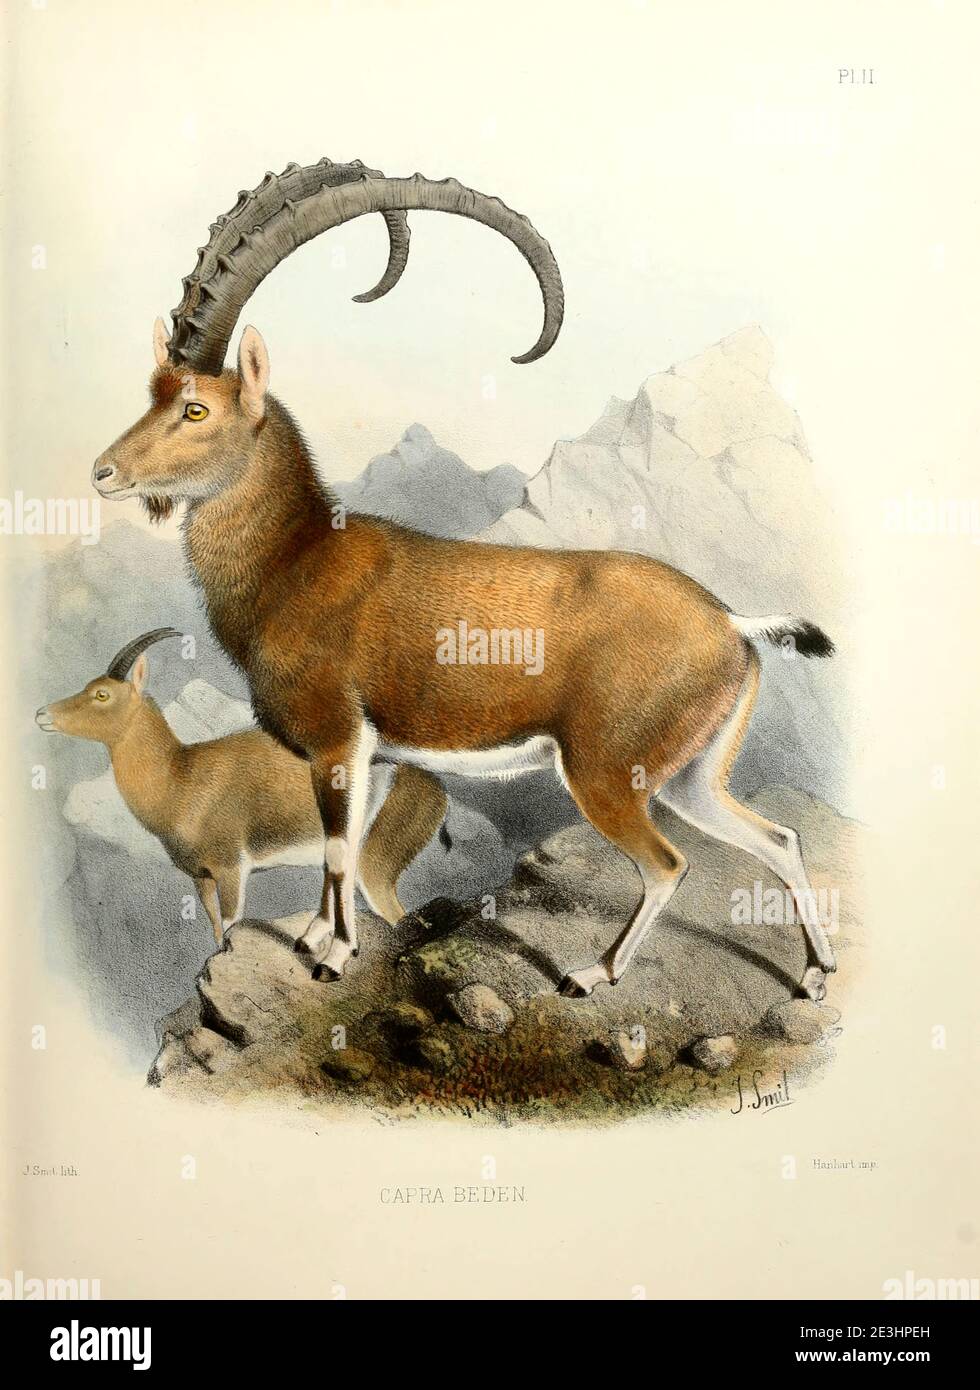 The Nubian ibex (Capra nubiana [Here as Capra beden]) is a desert-dwelling goat species found in mountainous areas of northern and northeast Africa, and the Middle East. Its range is within Algeria, Egypt, Ethiopia, Eritrea, Israel, Jordan, Oman, Saudi Arabia, Sudan, and Yemen. It is extirpated in Lebanon. From the survey of western Palestine. The fauna and flora of Palestine by Tristram, H. B. (Henry Baker), 1822-1906 Published by The Committee of the Palestine Exploration Fund, London, 1884 Stock Photo